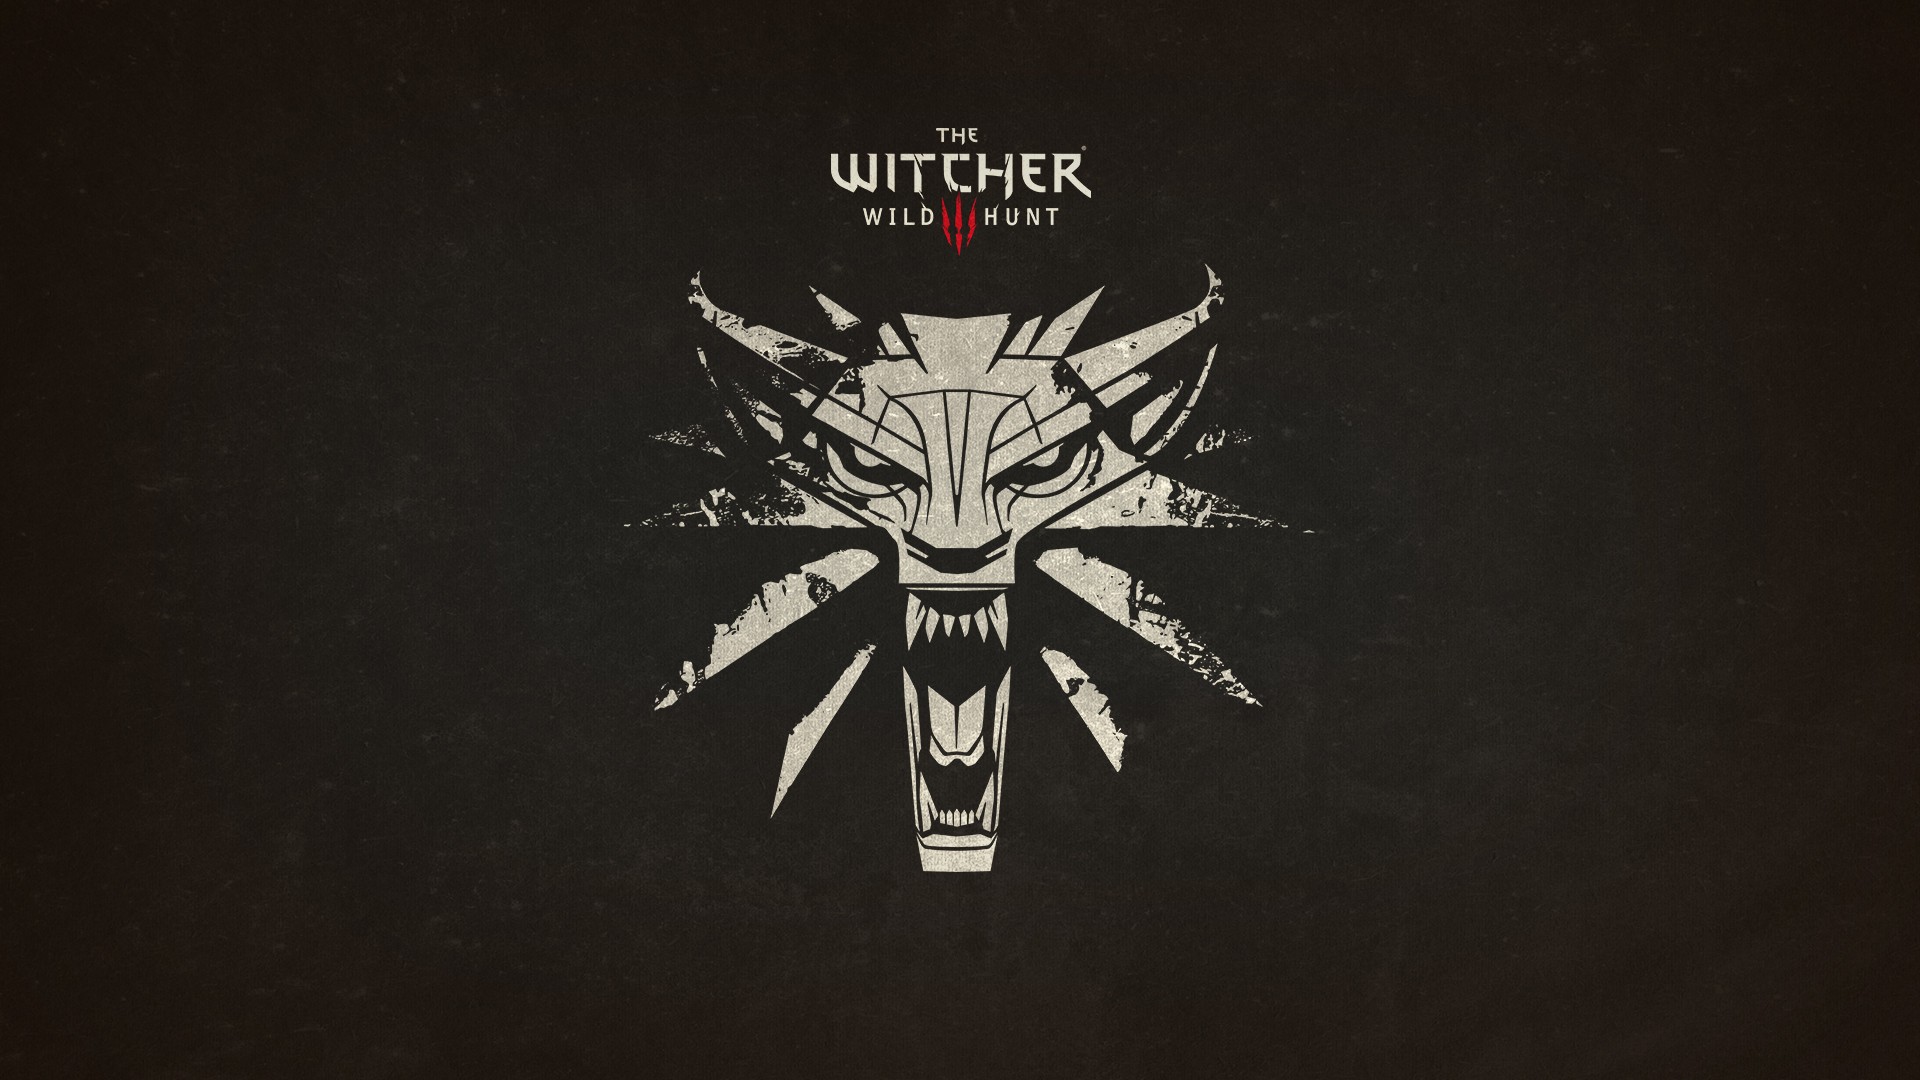 General 1920x1080 The Witcher 3: Wild Hunt video games video game art CD Projekt RED RPG PC gaming